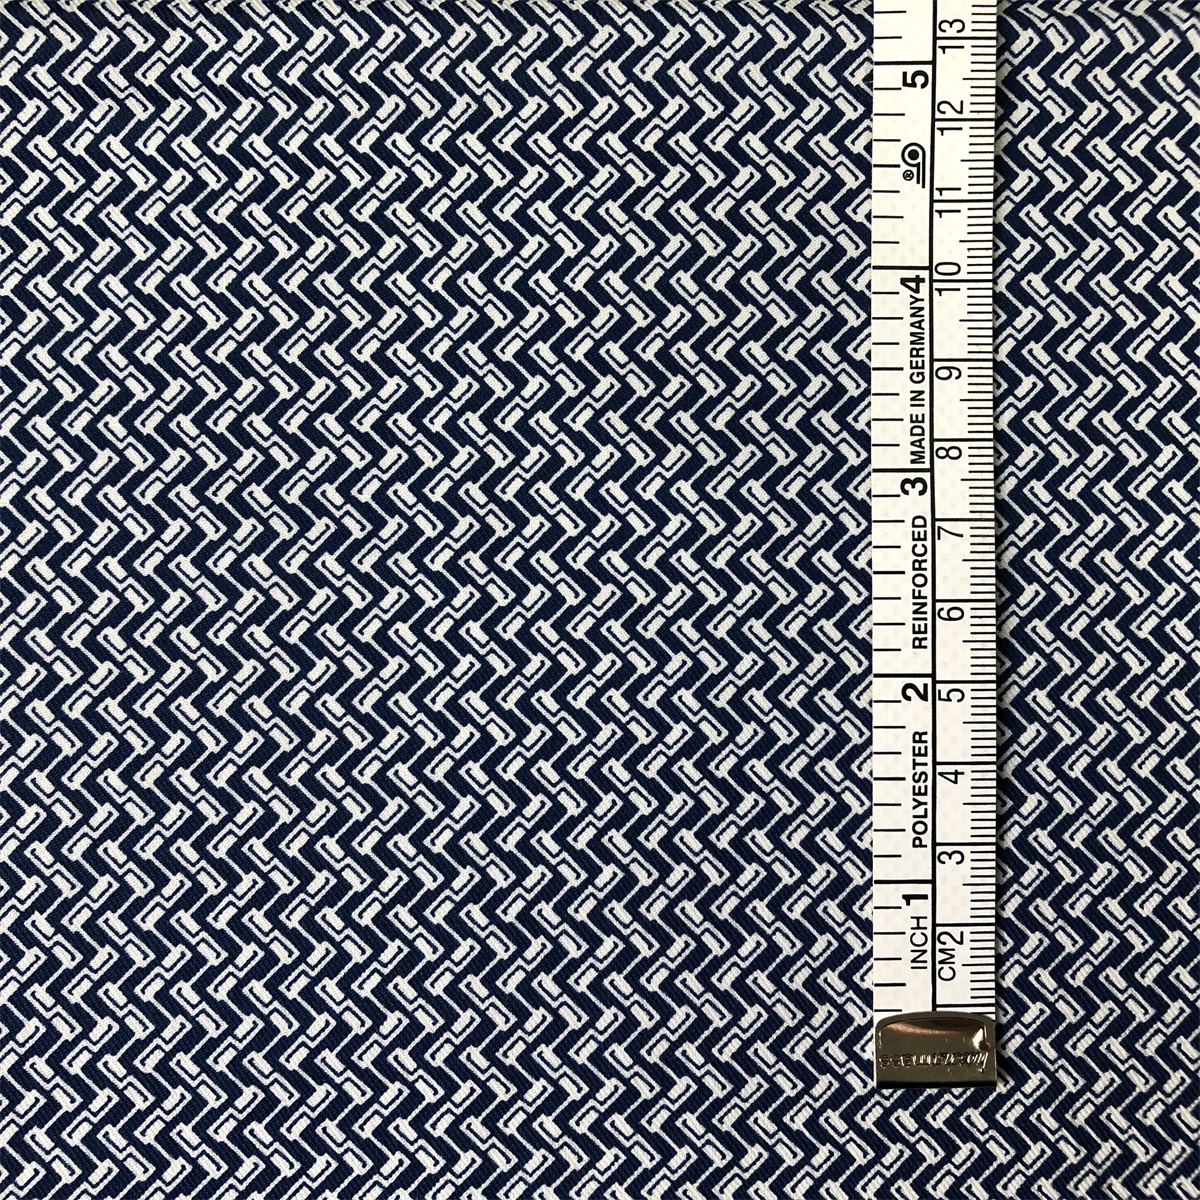 Fashion design Cotton Fabric for men's shirts 100% cotton printed on yarn dyed twill chambray dobby woven shirts fabric